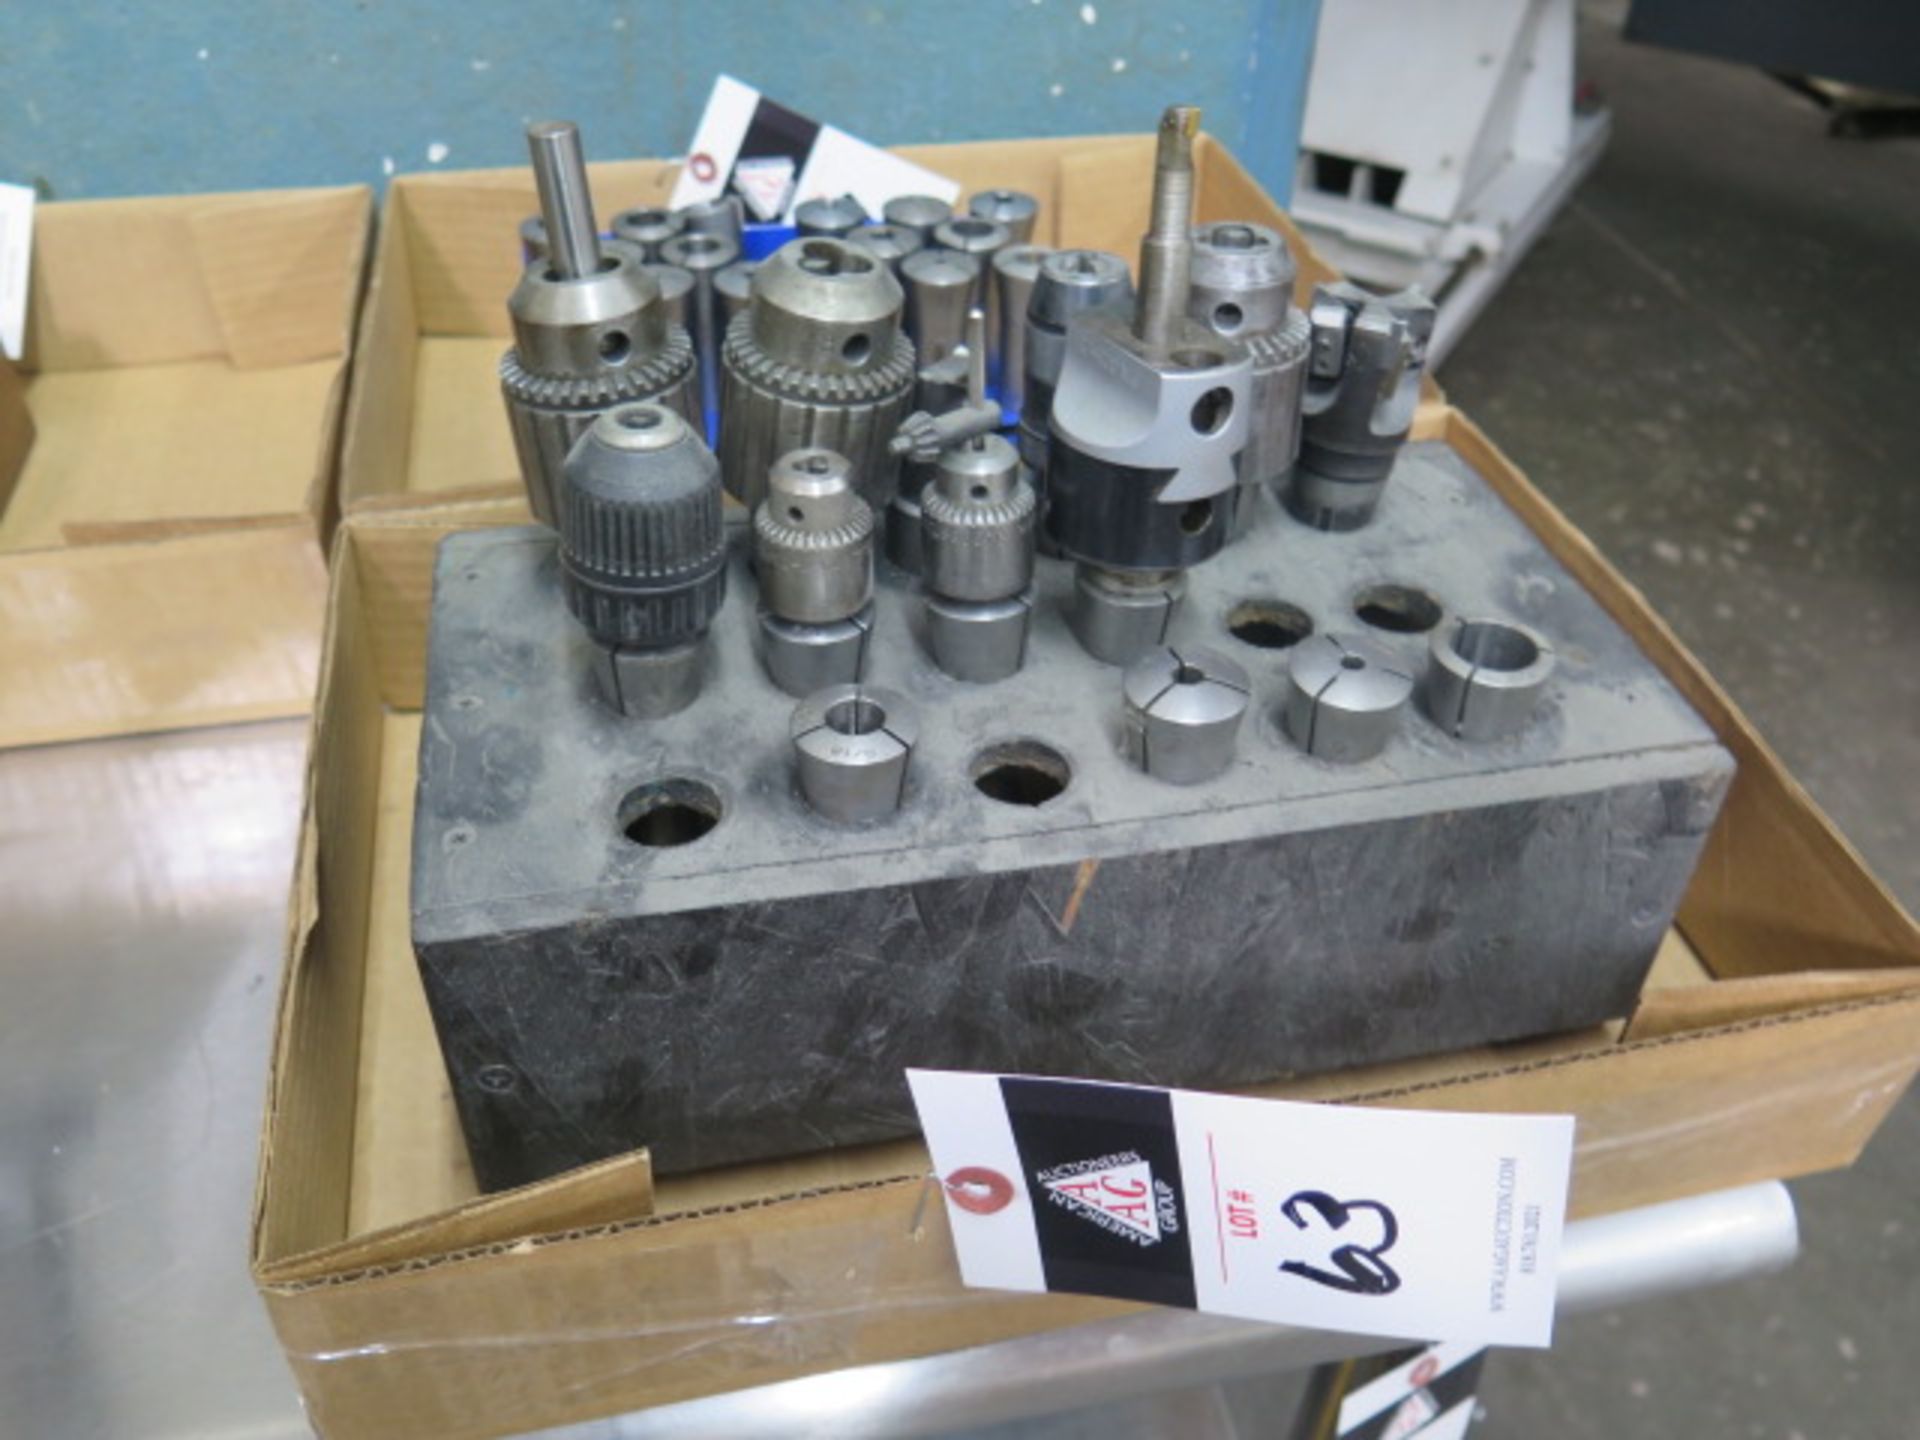 R8 Tooling and Collets (14) (SOLD AS-IS - NO WARRANTY)